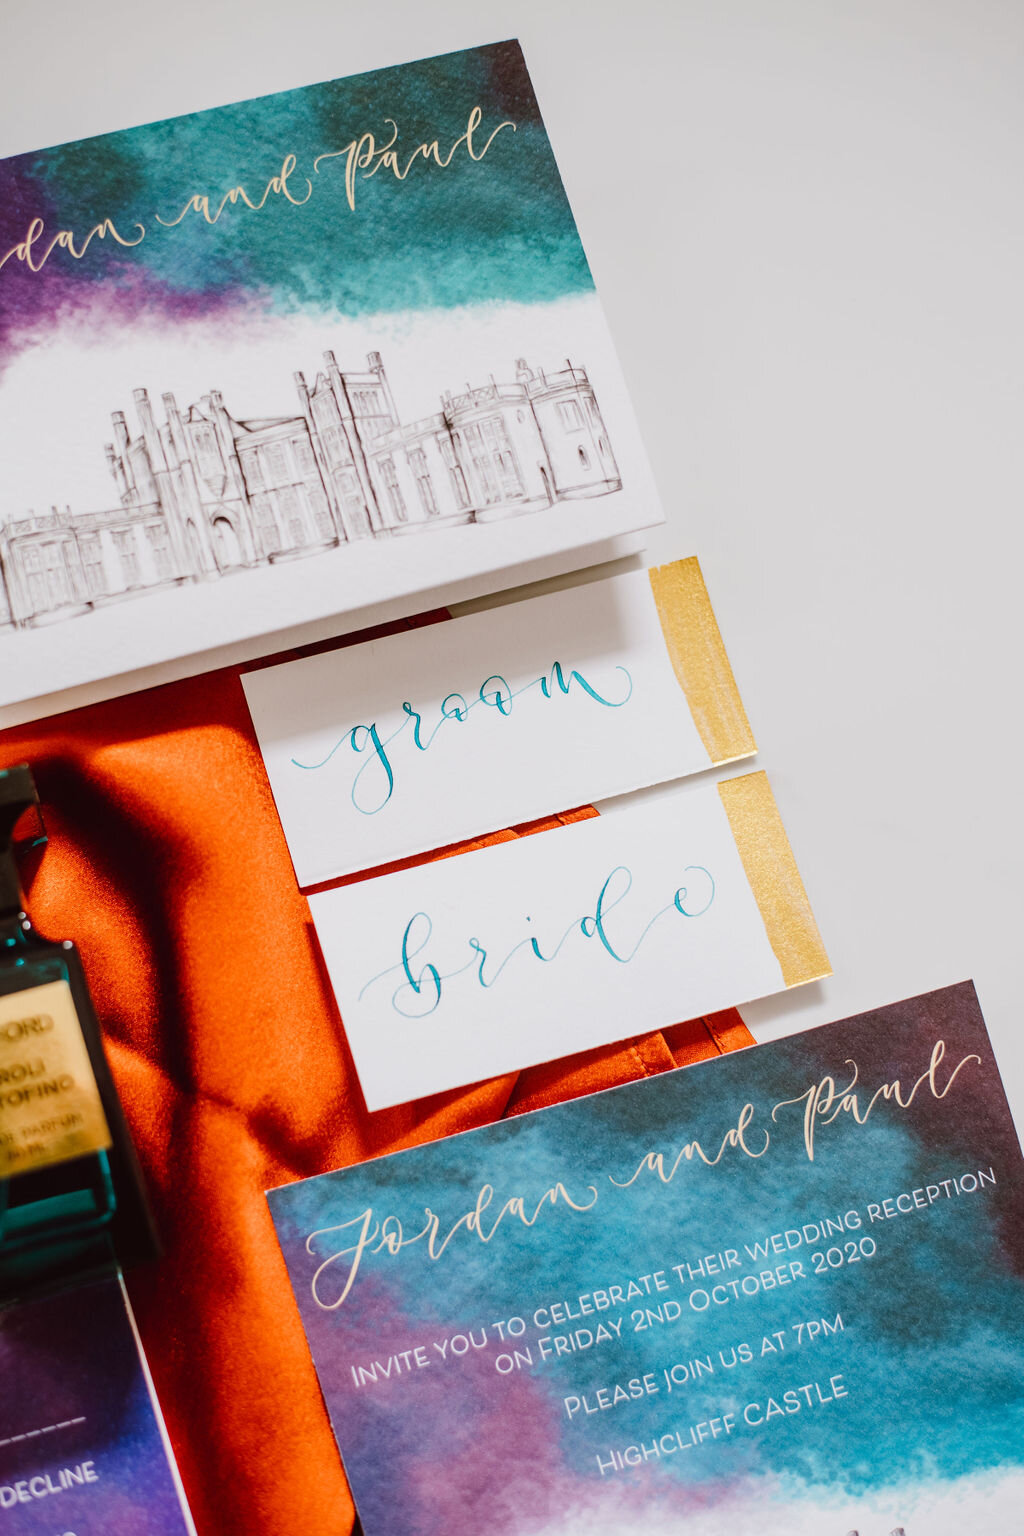 Teal calligraphy with gold detail place cards by the amyverse to match turquoise and purple stationery suite for Highcliff Castle.jpg